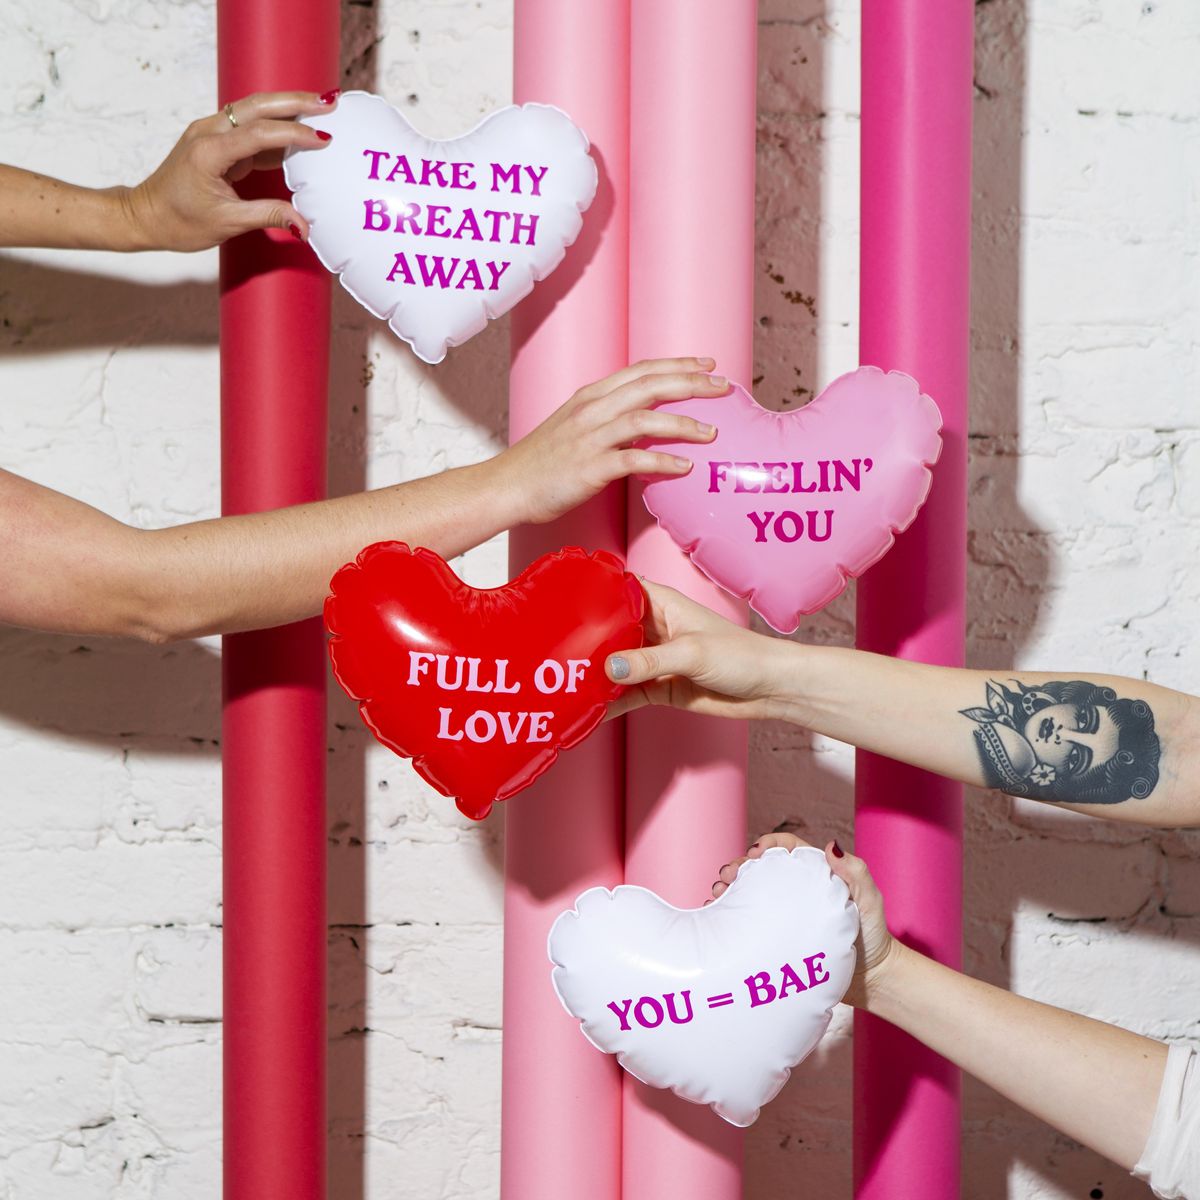 candy heart balloons gifts for your partner according to your love language